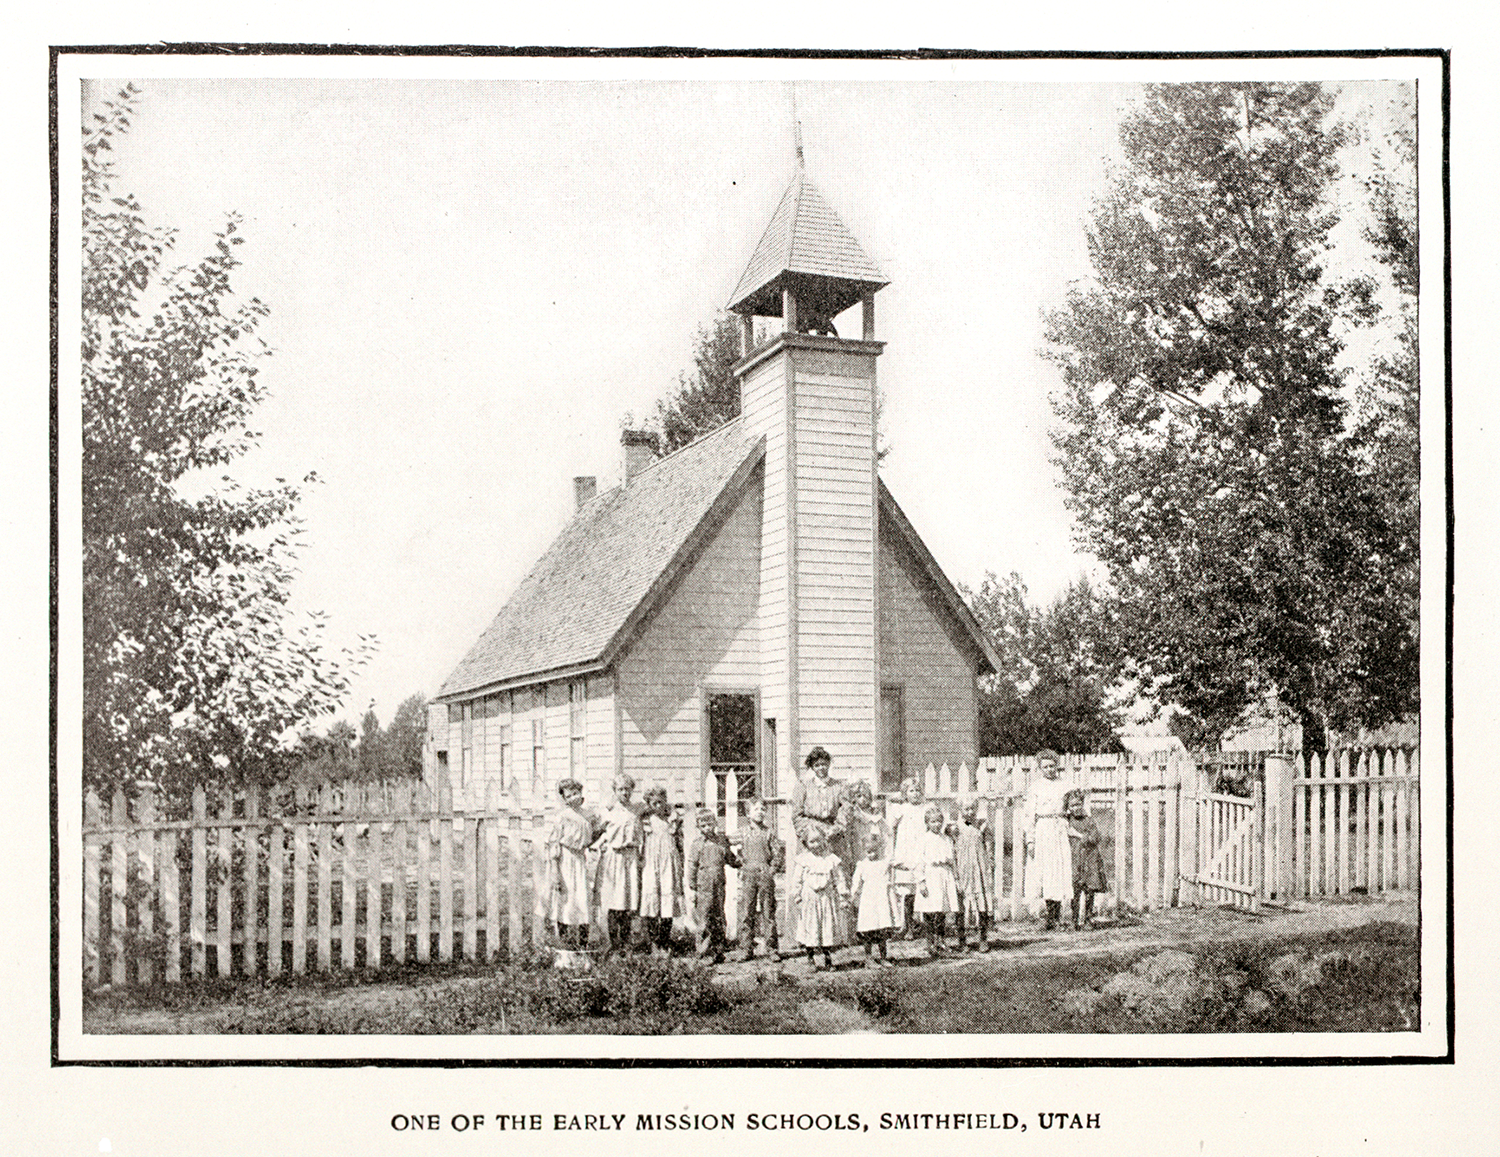 One of the early mission schools, Smithfield, Utah